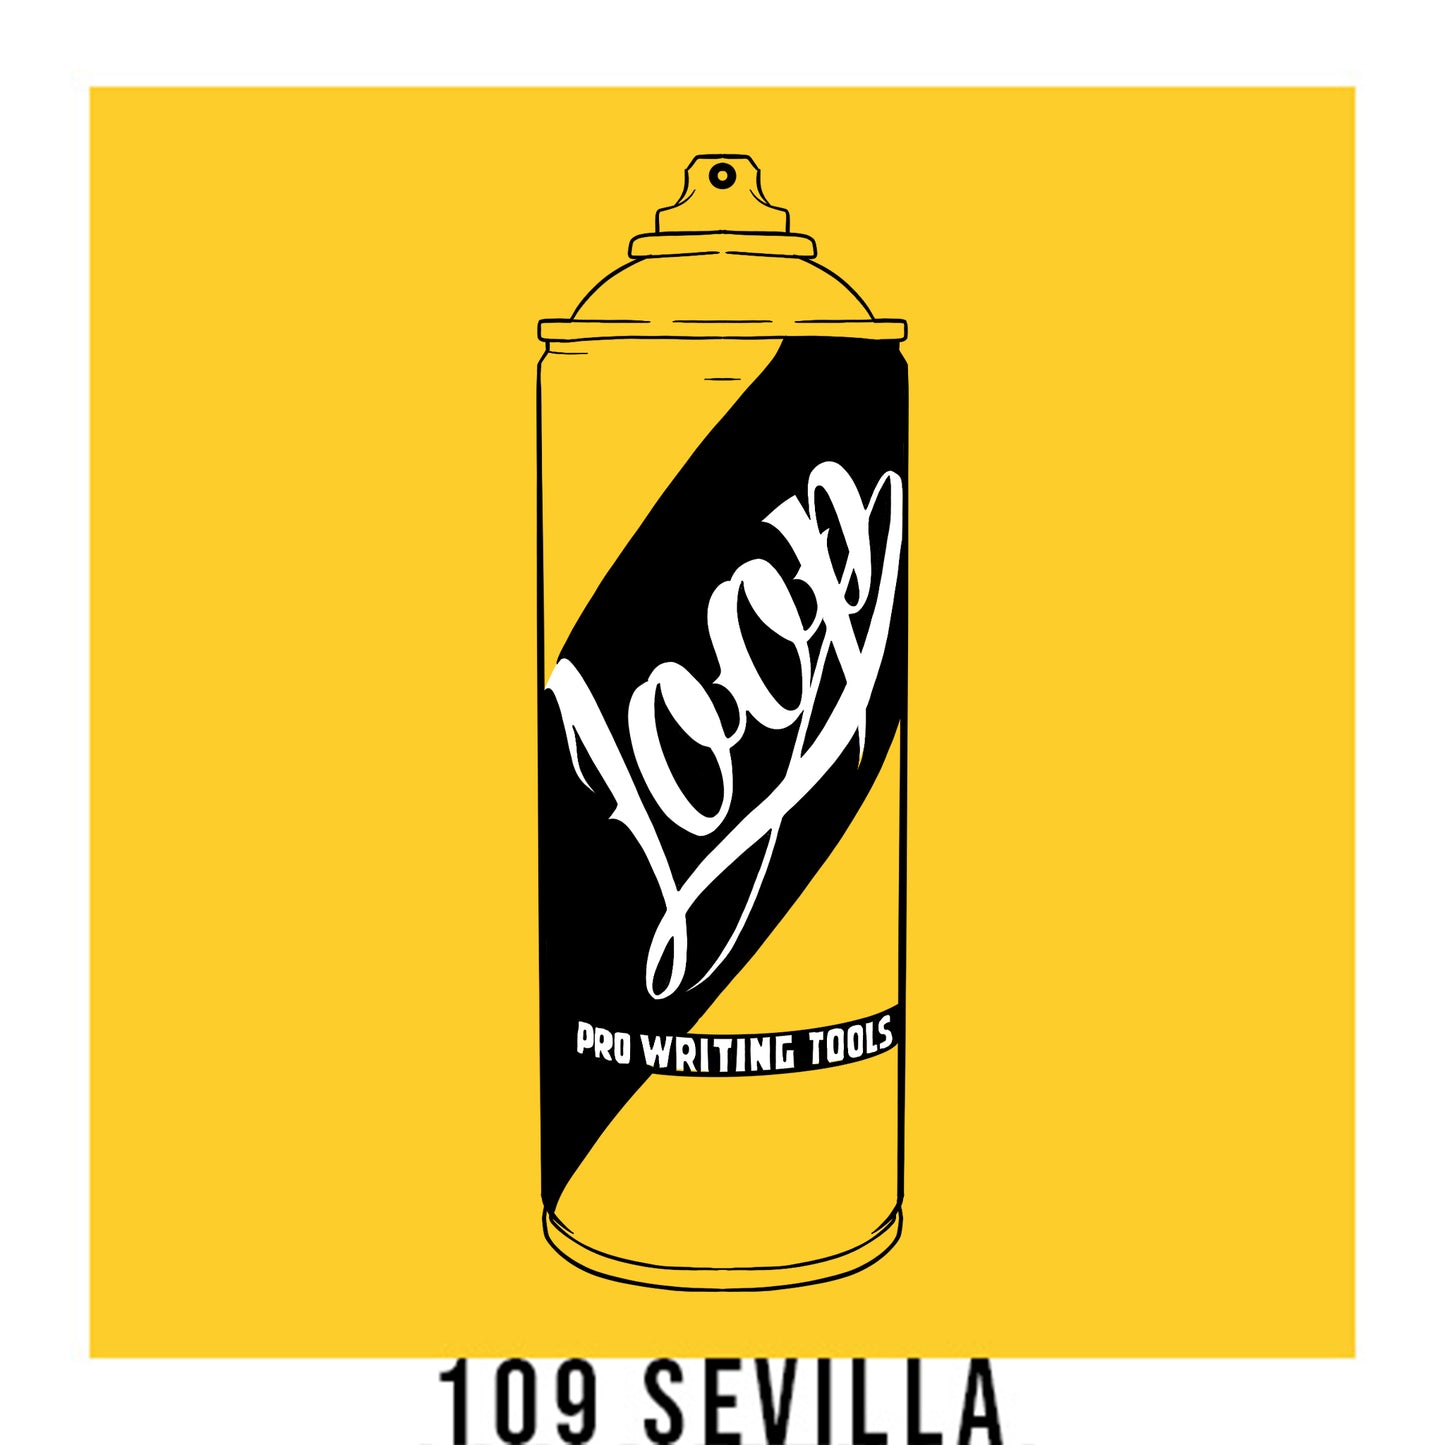 A black outline drawing of a yellow spray paint can with the word "Loop" written on the face in script. The background is a color swatch of the same yellow with a white border with the words "109 Sevilla" at the bottom.